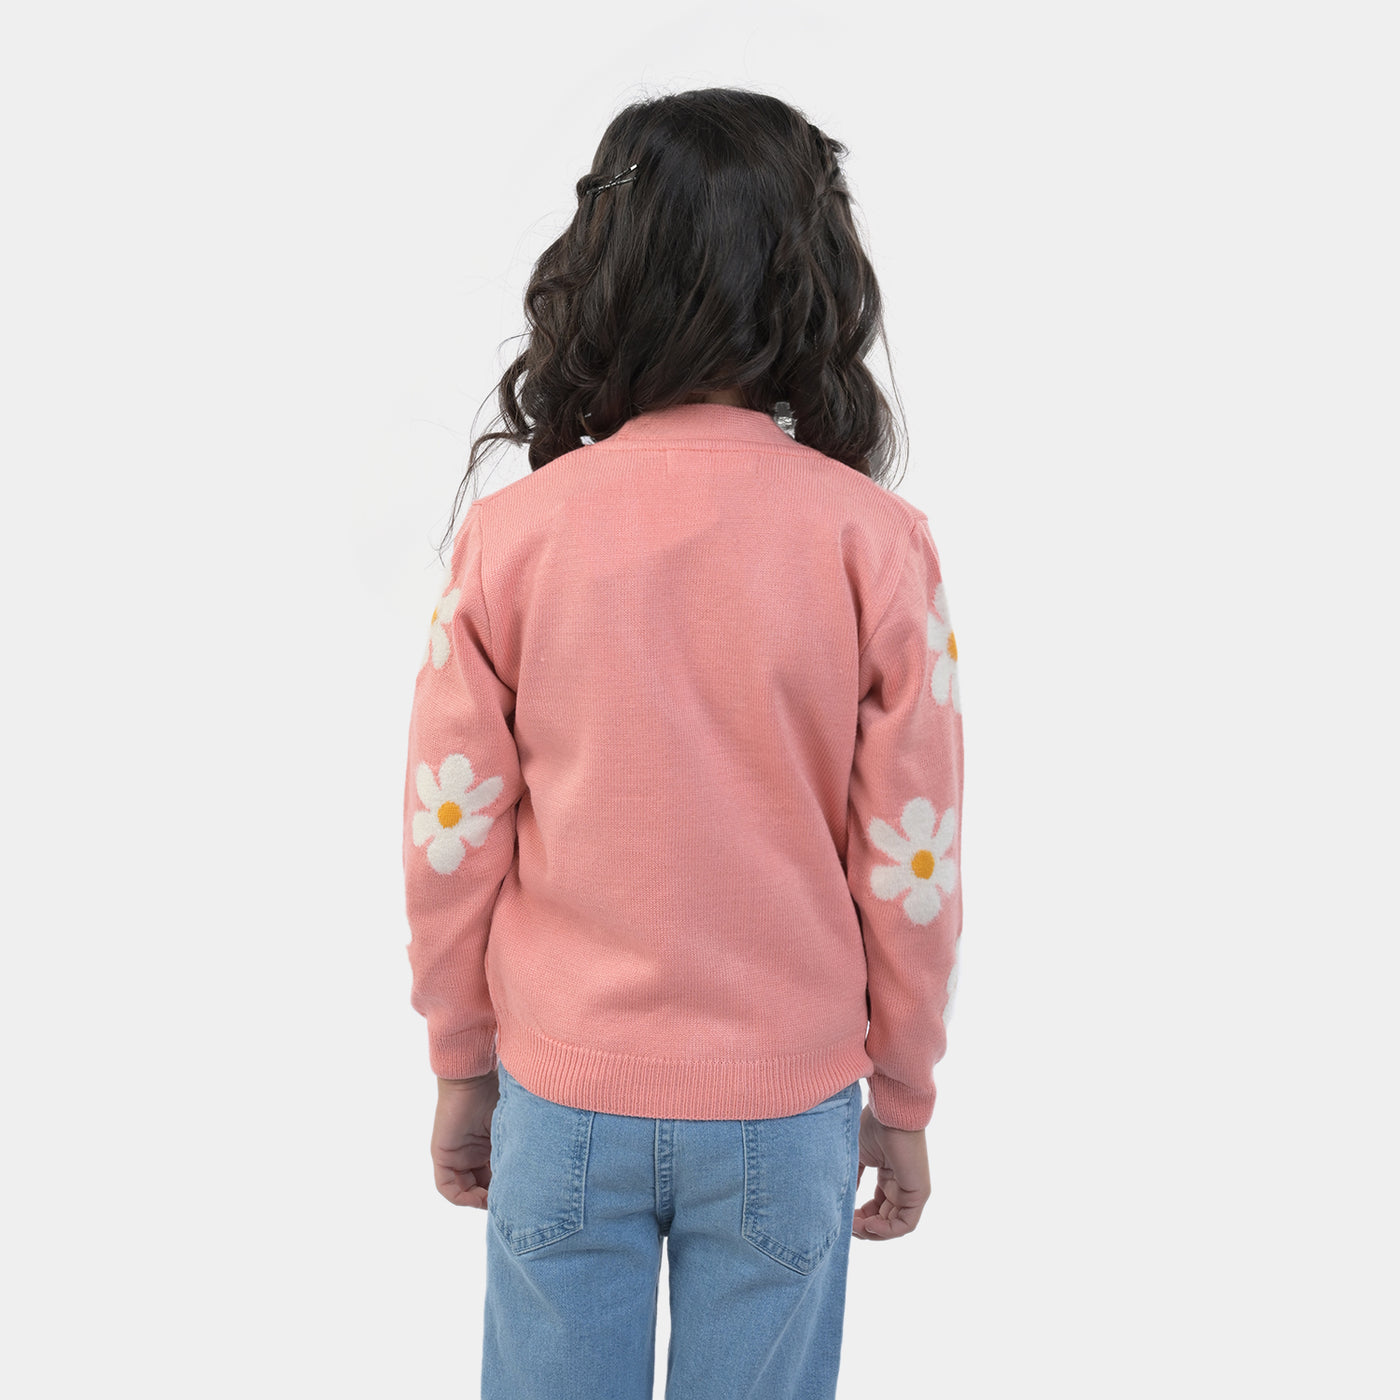 Girls Knitted Sweater Flower -Pink